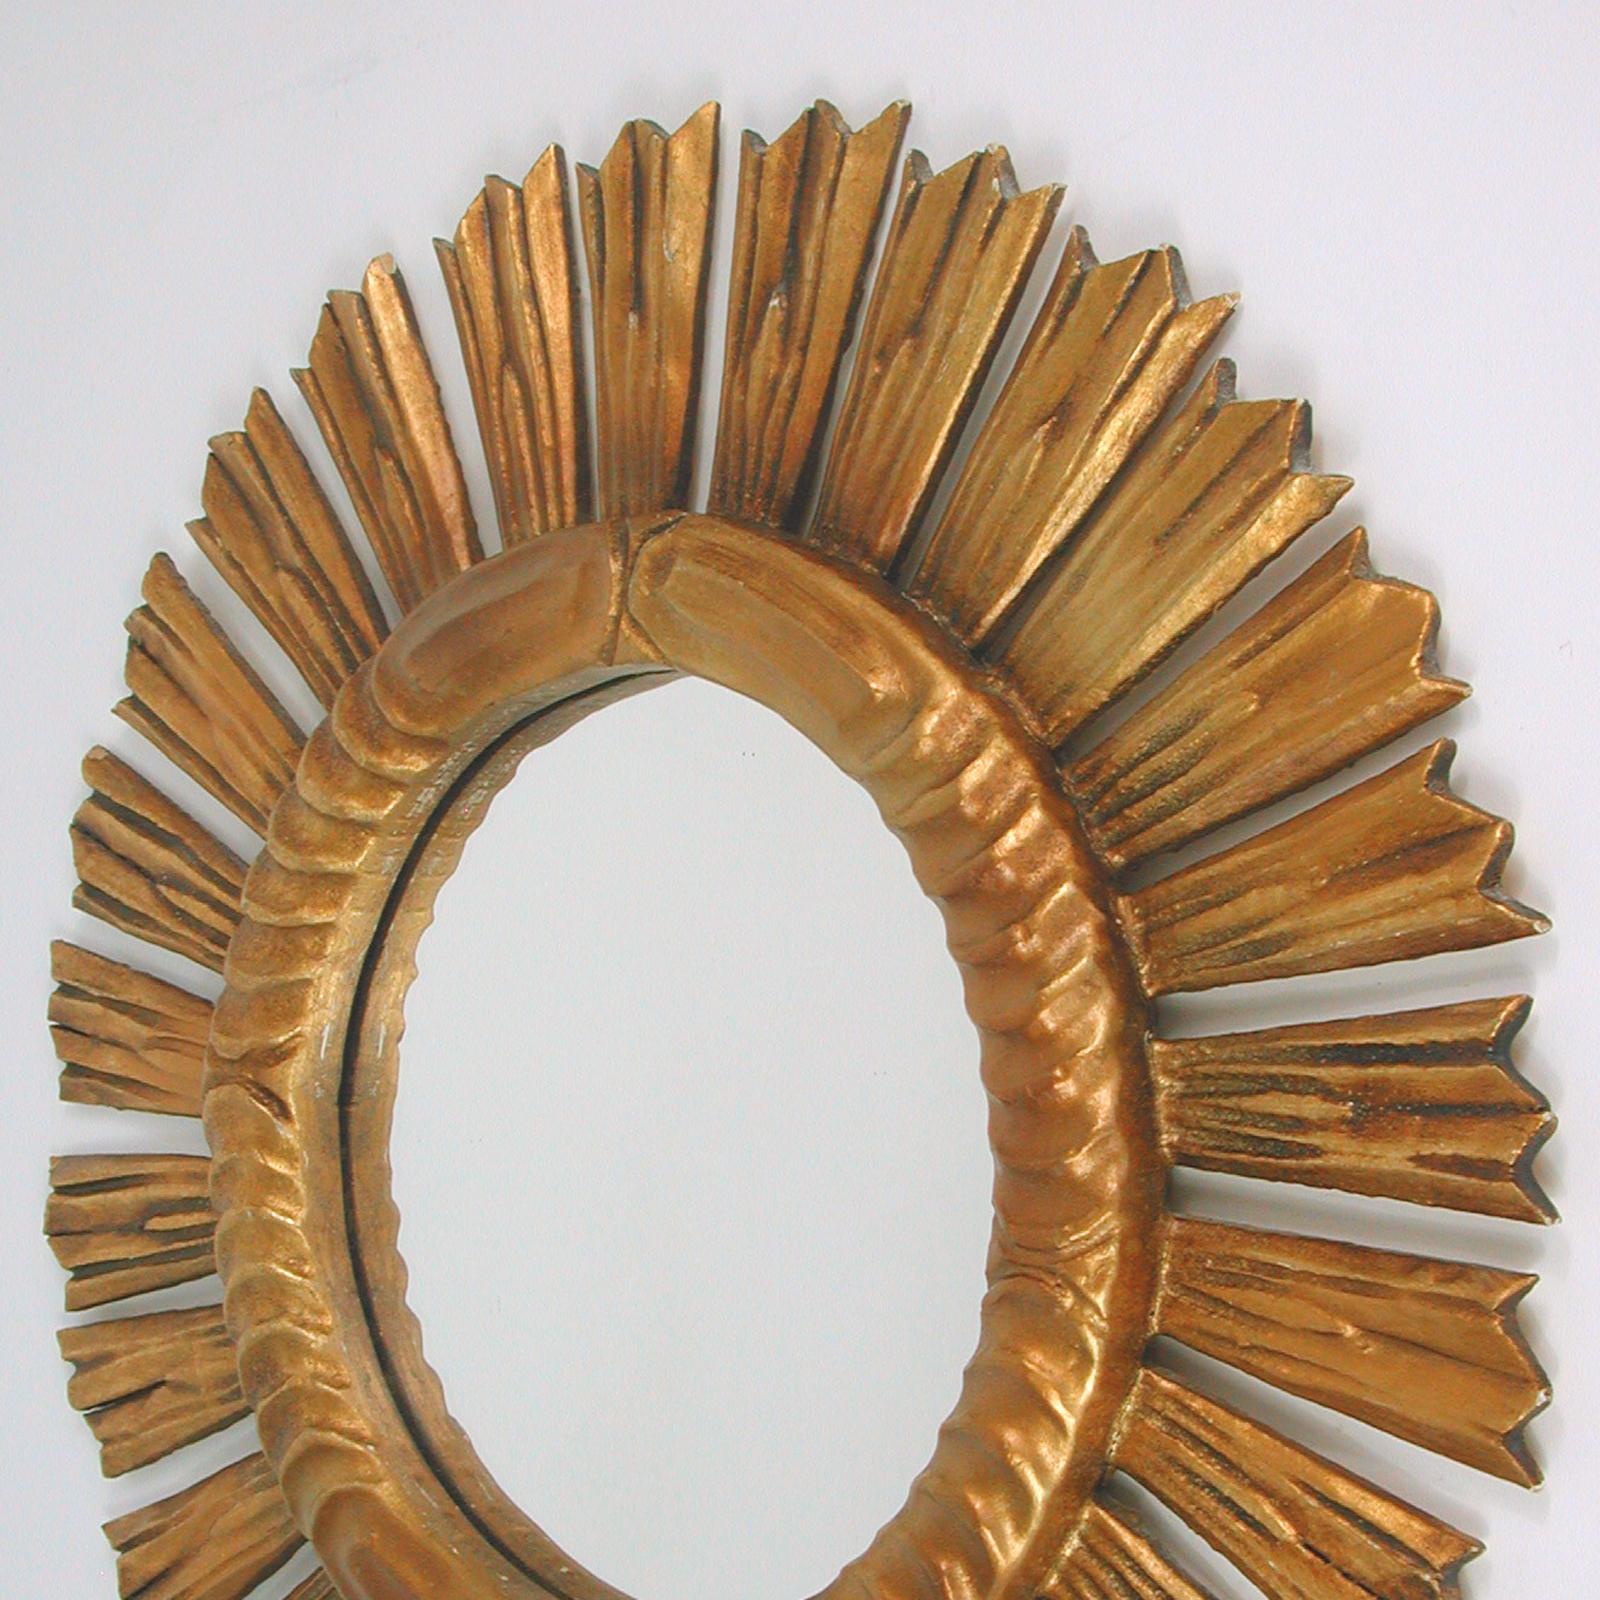 Spanish Sunburst Carved Giltwood Mirror, 1940s to 1950s For Sale 6